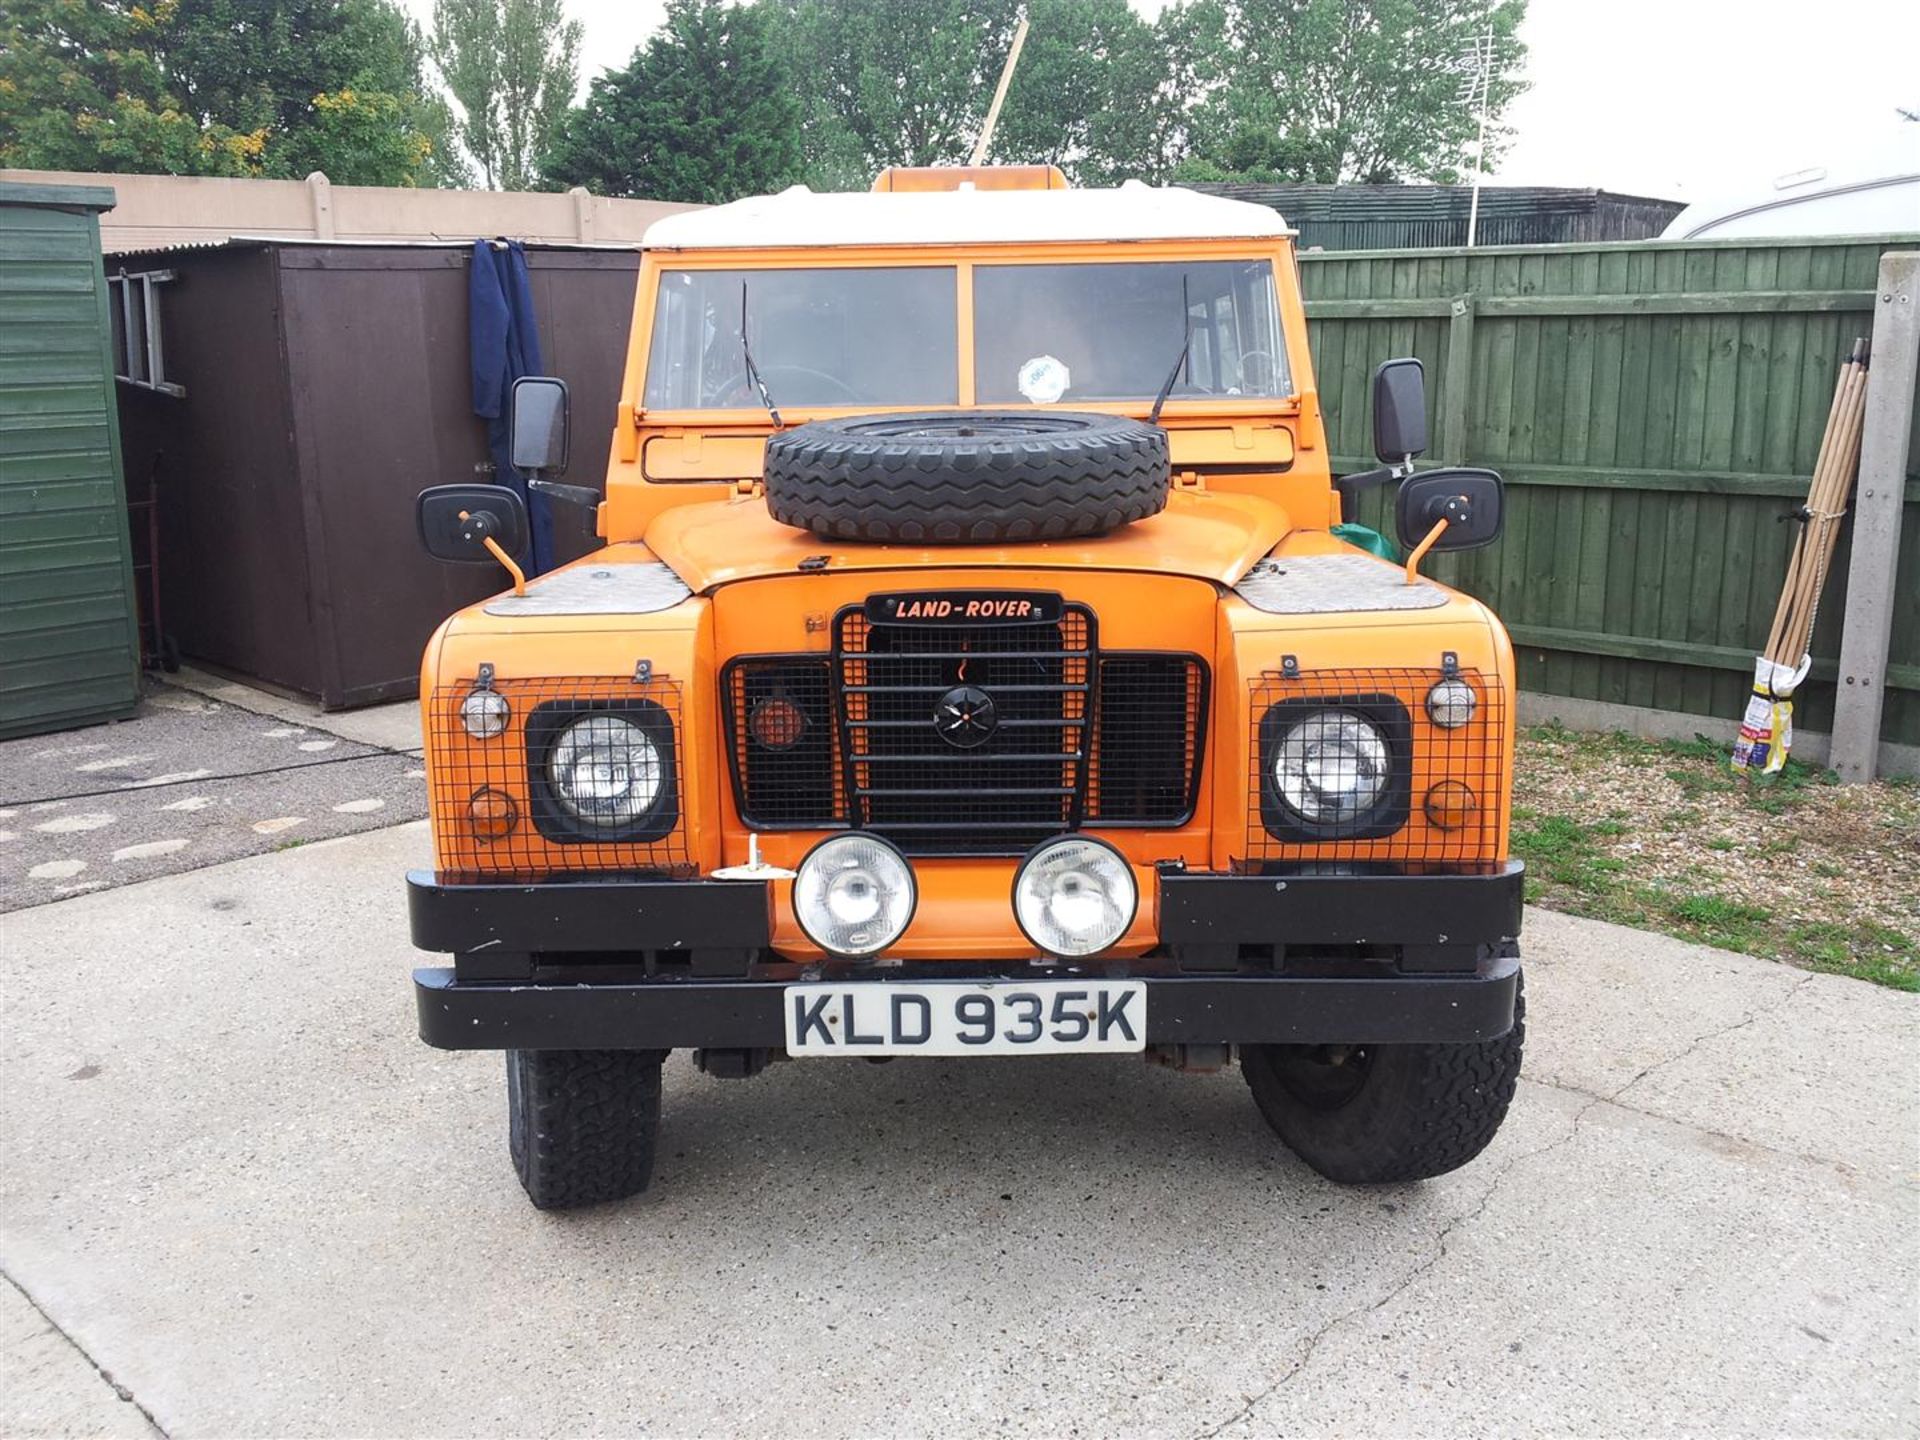 1972 Land Rover Series 3 Reg. No. KLD 935K Chassis No. 90102031A This 2.8 litre diesel Series 3 is - Image 2 of 3